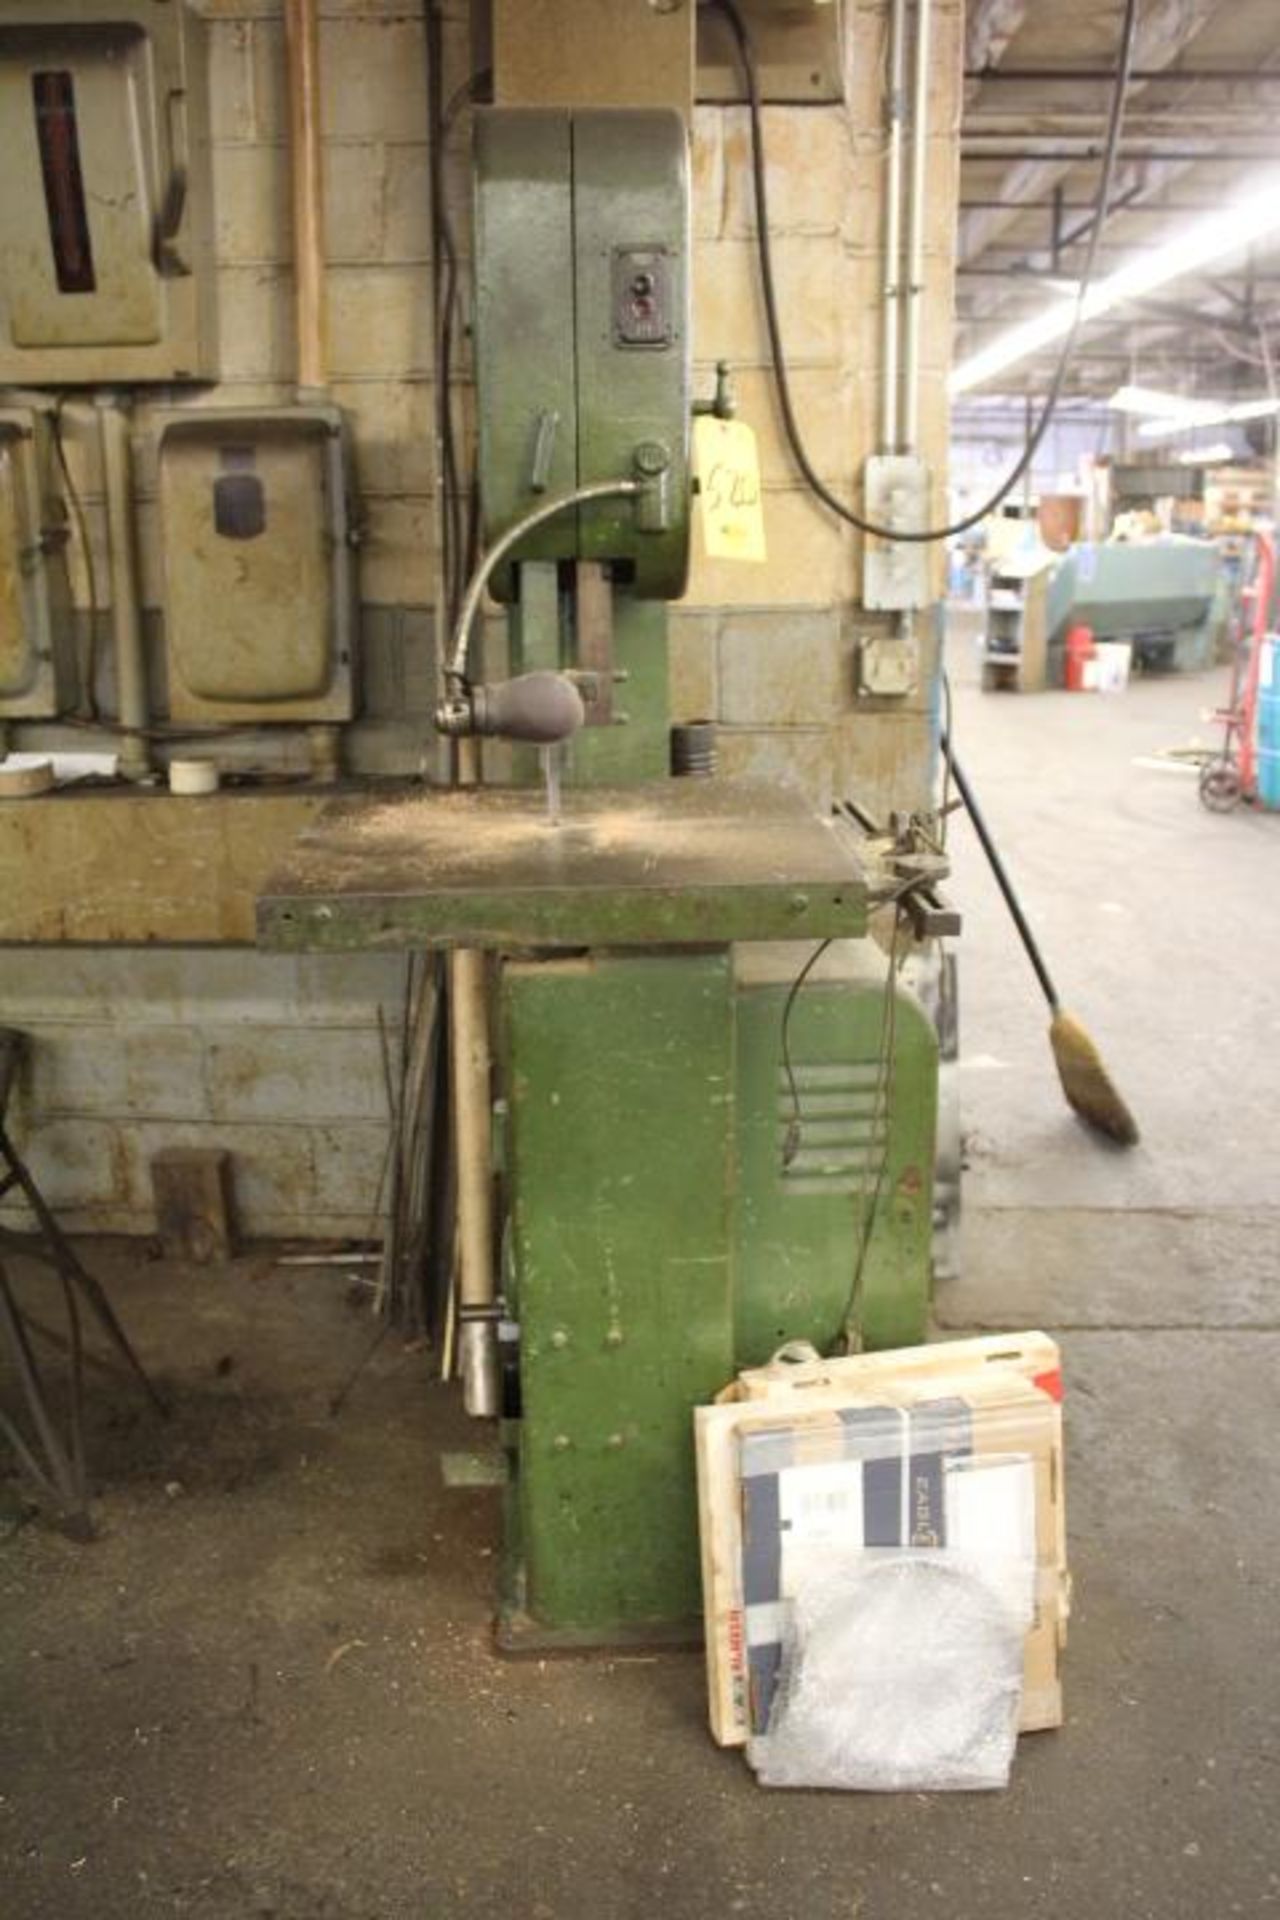 DOALL METALMASTER 16 IN. VERTICAL BAND SAW, 24 IN. X 24 IN. TABLE (Loading Fee $150.00) - Image 2 of 2